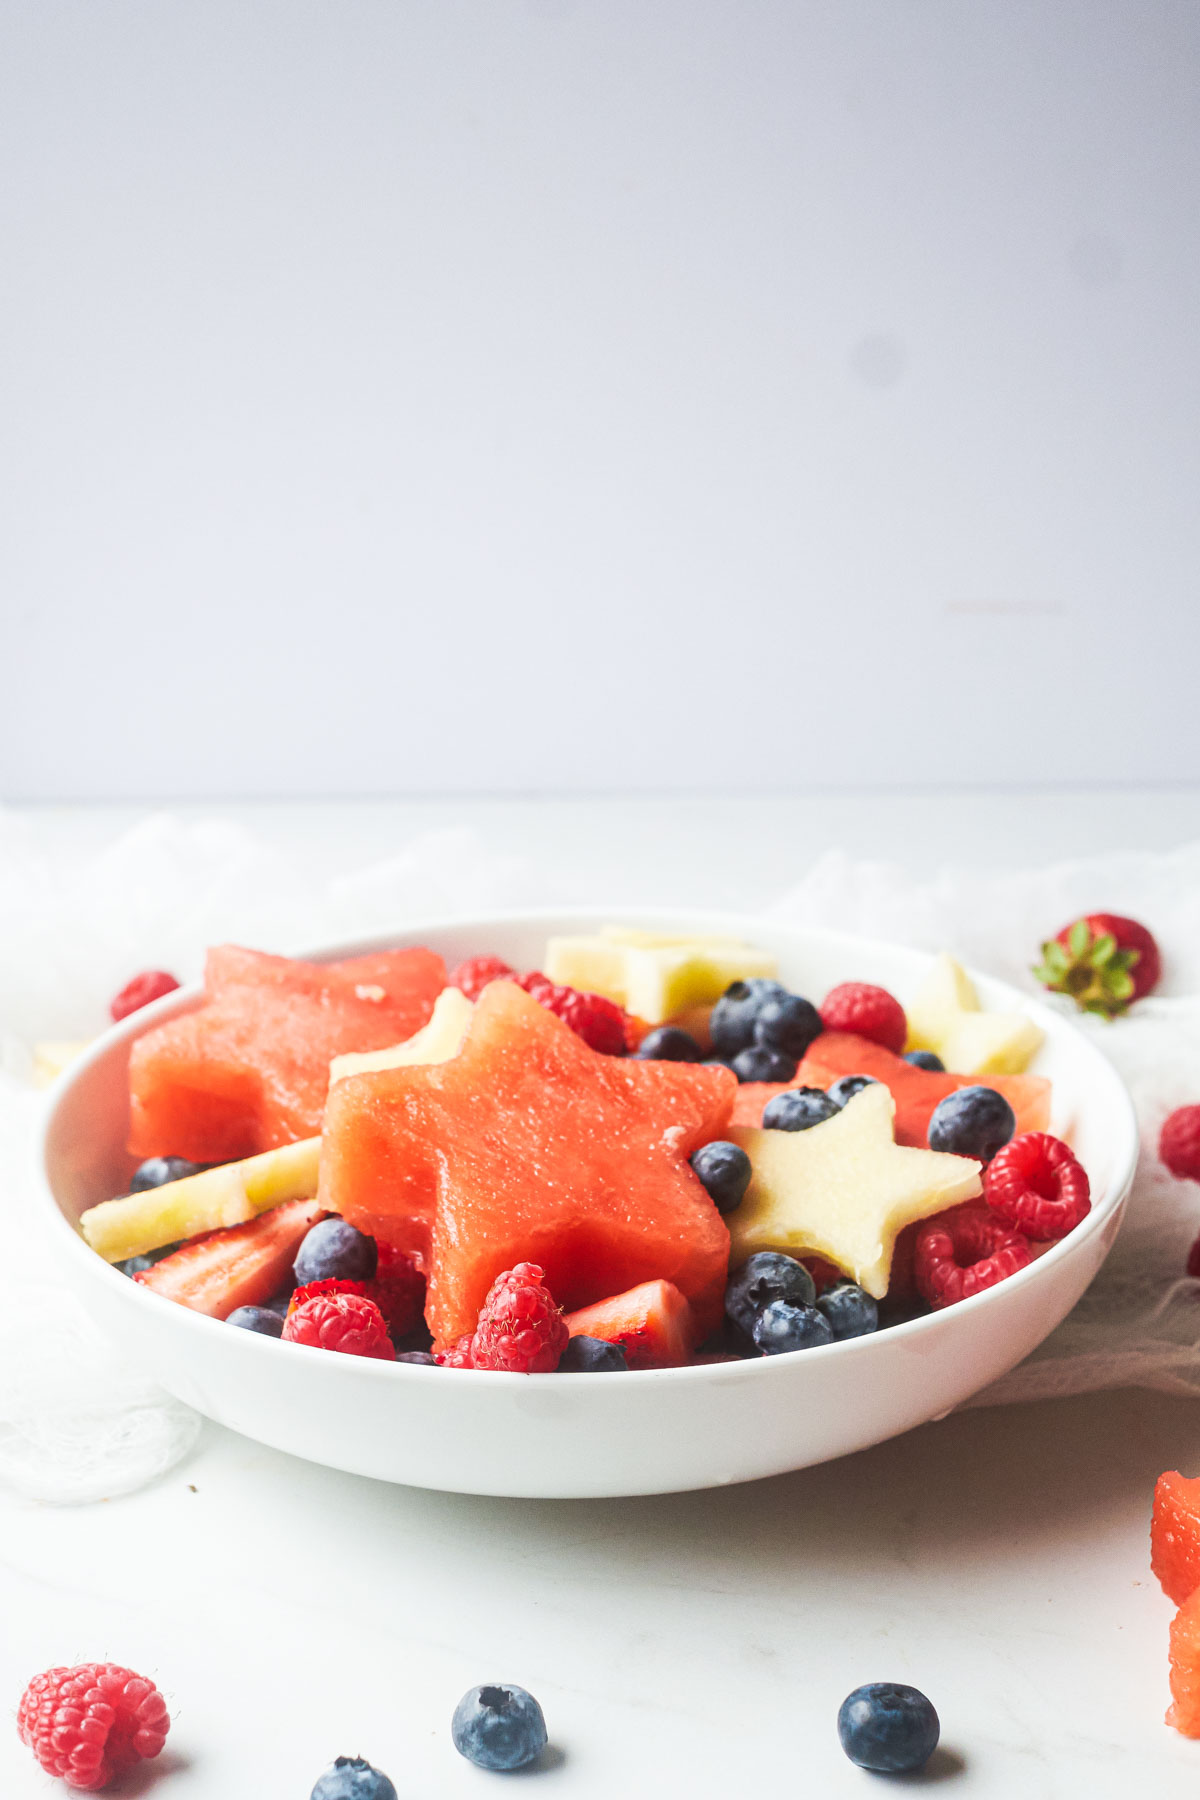 side view of a red white and blue fruit salad on a white tables, with some fruit dotted about.